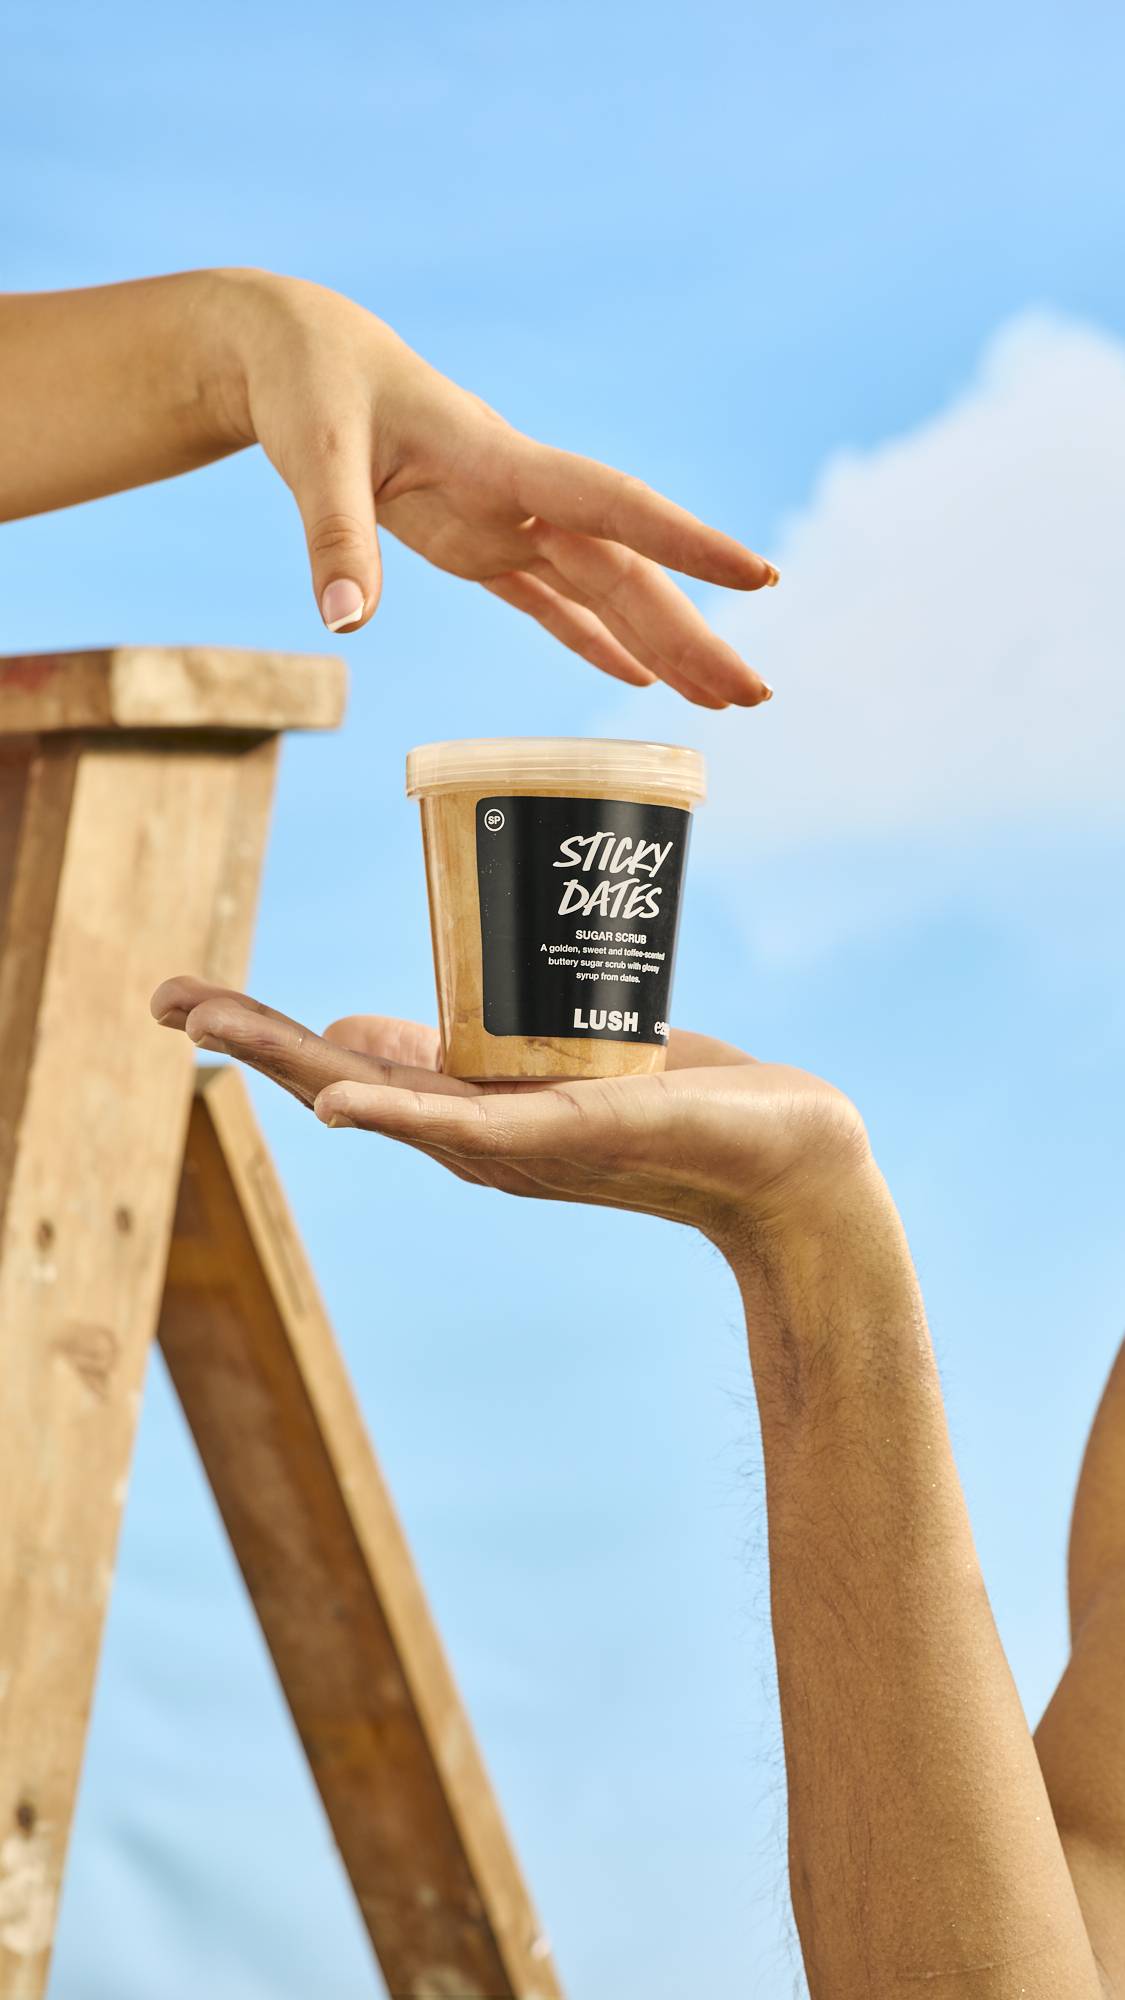 The image shows a close-up of the model's hand out flat while holding the Sticky Dates body scrub lush pot. The sky is blue and another hand is reaching in for the pot. 